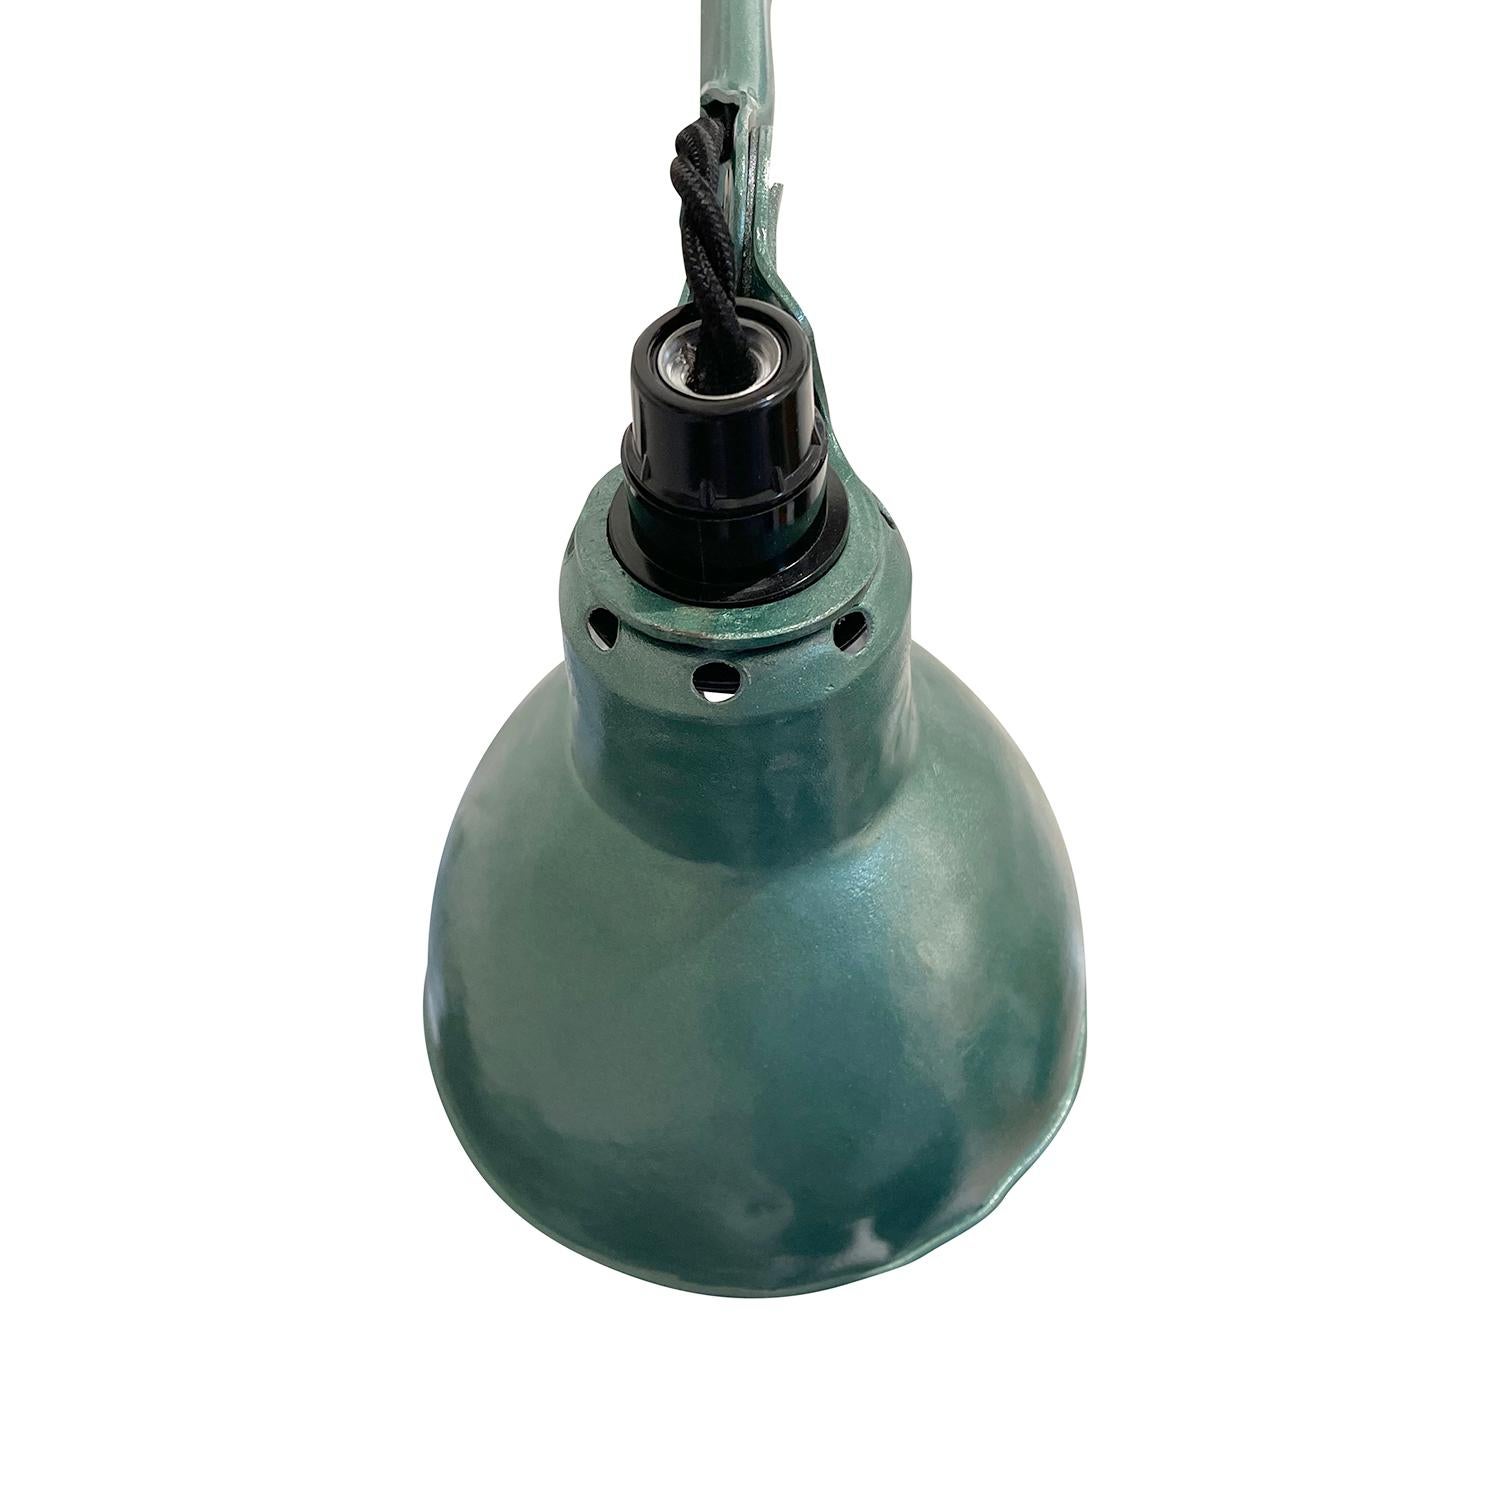 20th Century Green French Industrial Metal Work Lamp - Vintage Office Light For Sale 2